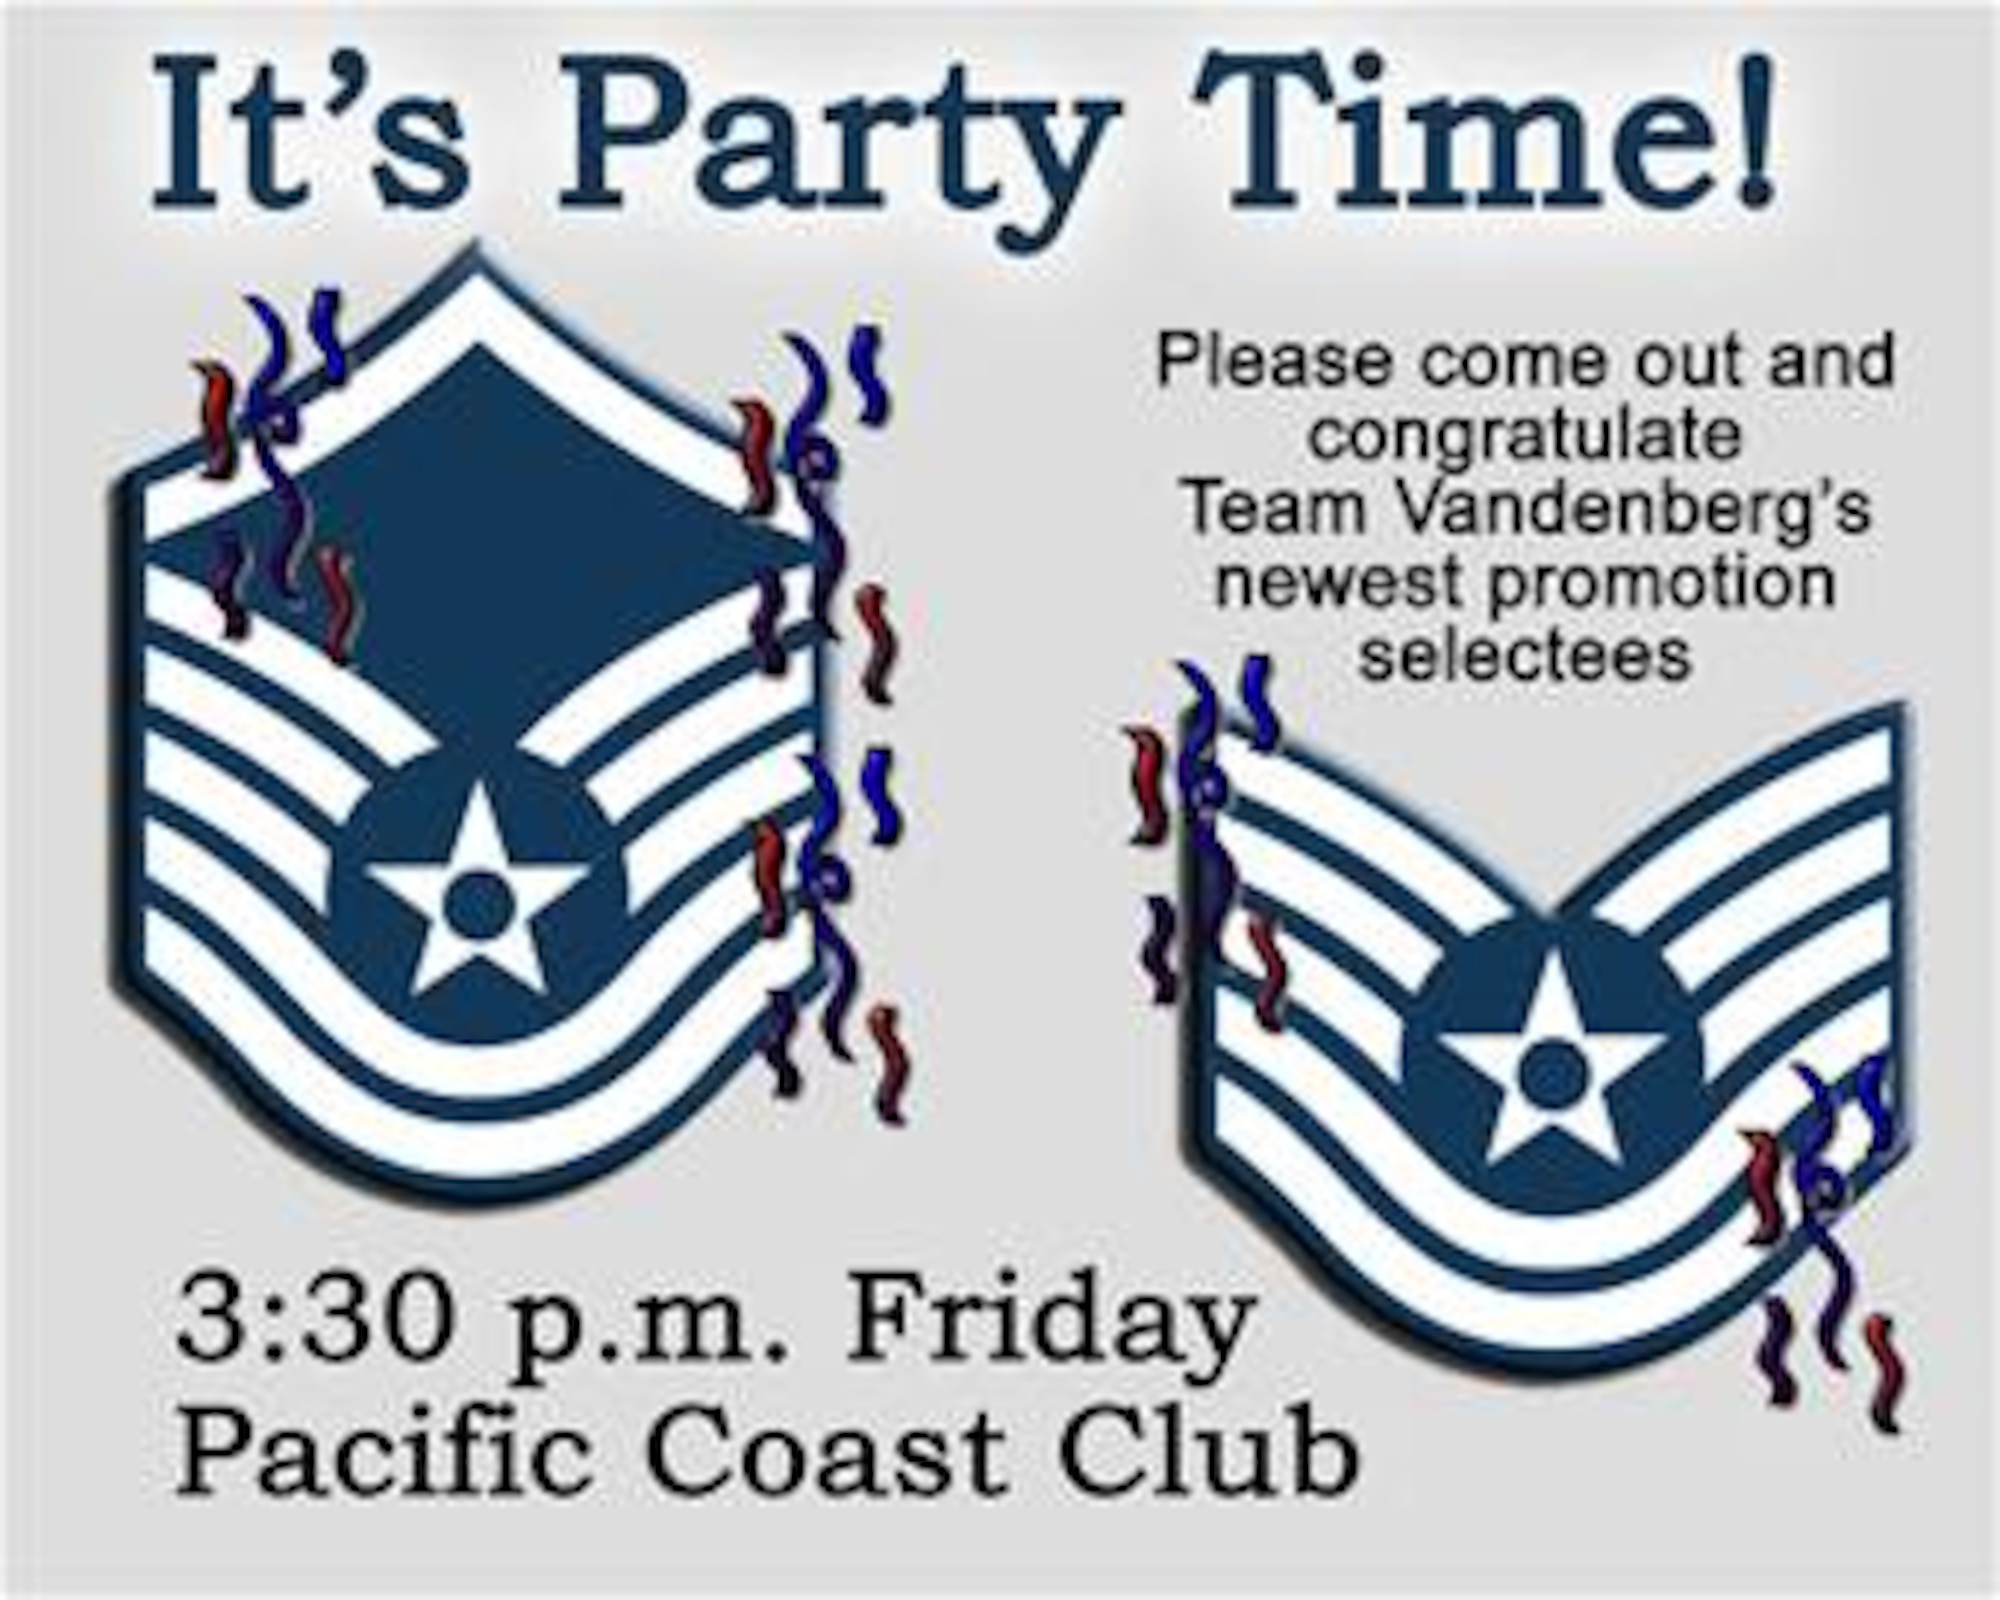 Vandenberg is set to hold a party at 3:30 p.m. Friday in the Pacific Coast Club to congratulate the base's newest promotion selectees.